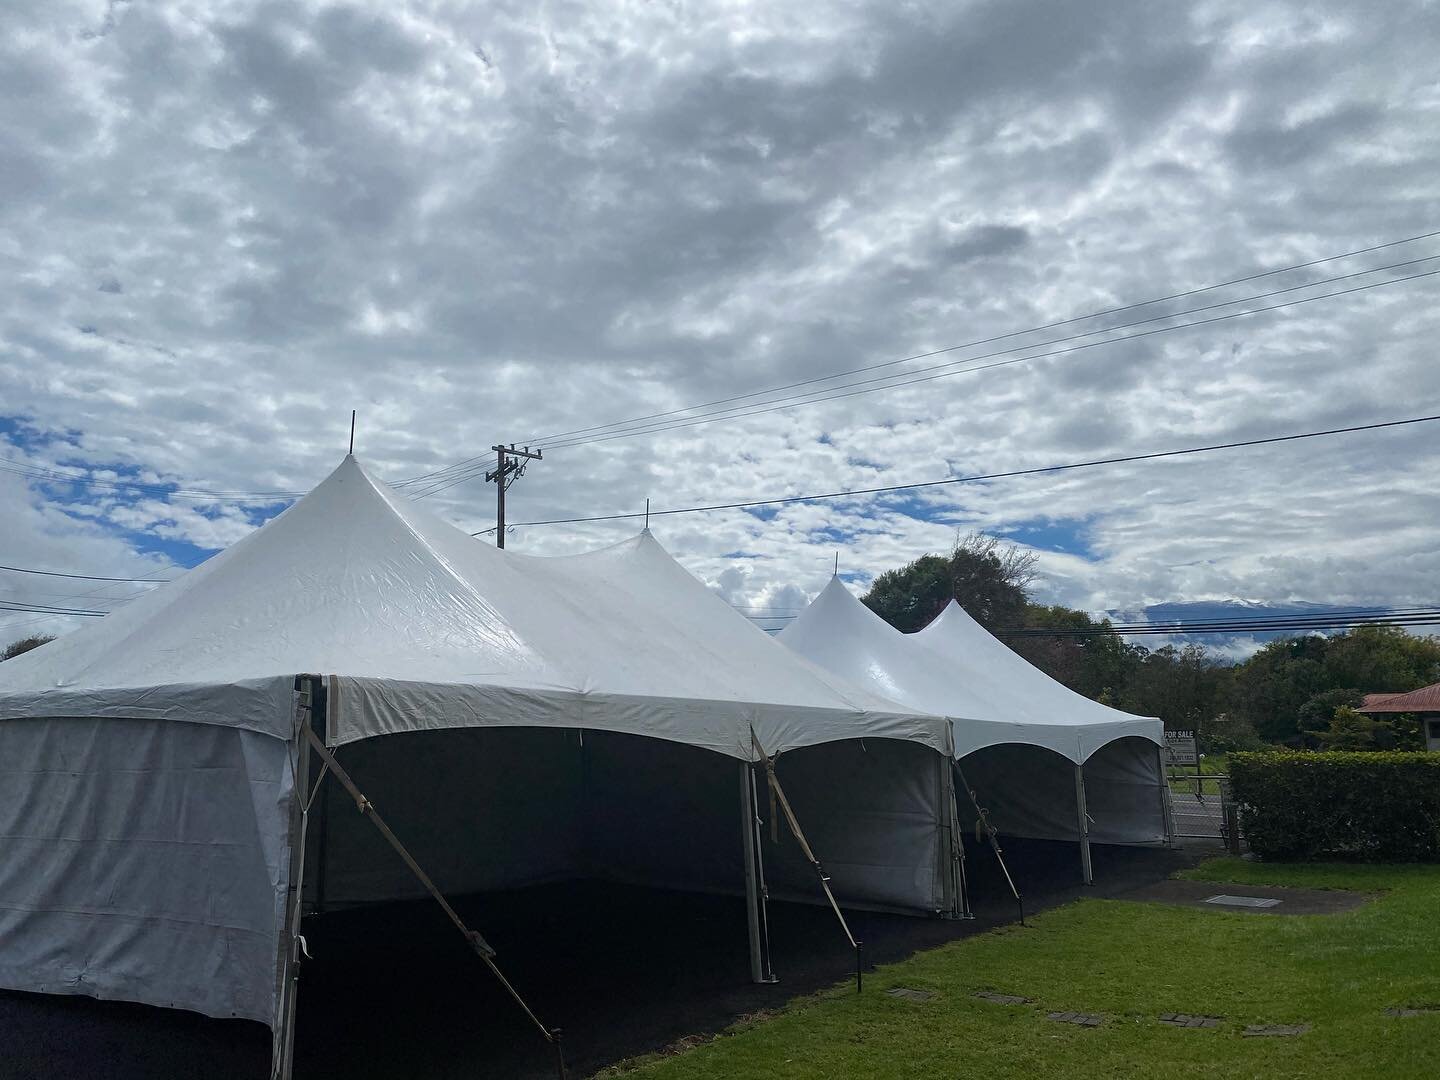 20x tents for classrooms at Environet. @bigislandtents #hawaiievents #bigislandtents #bit20x30peakedtent